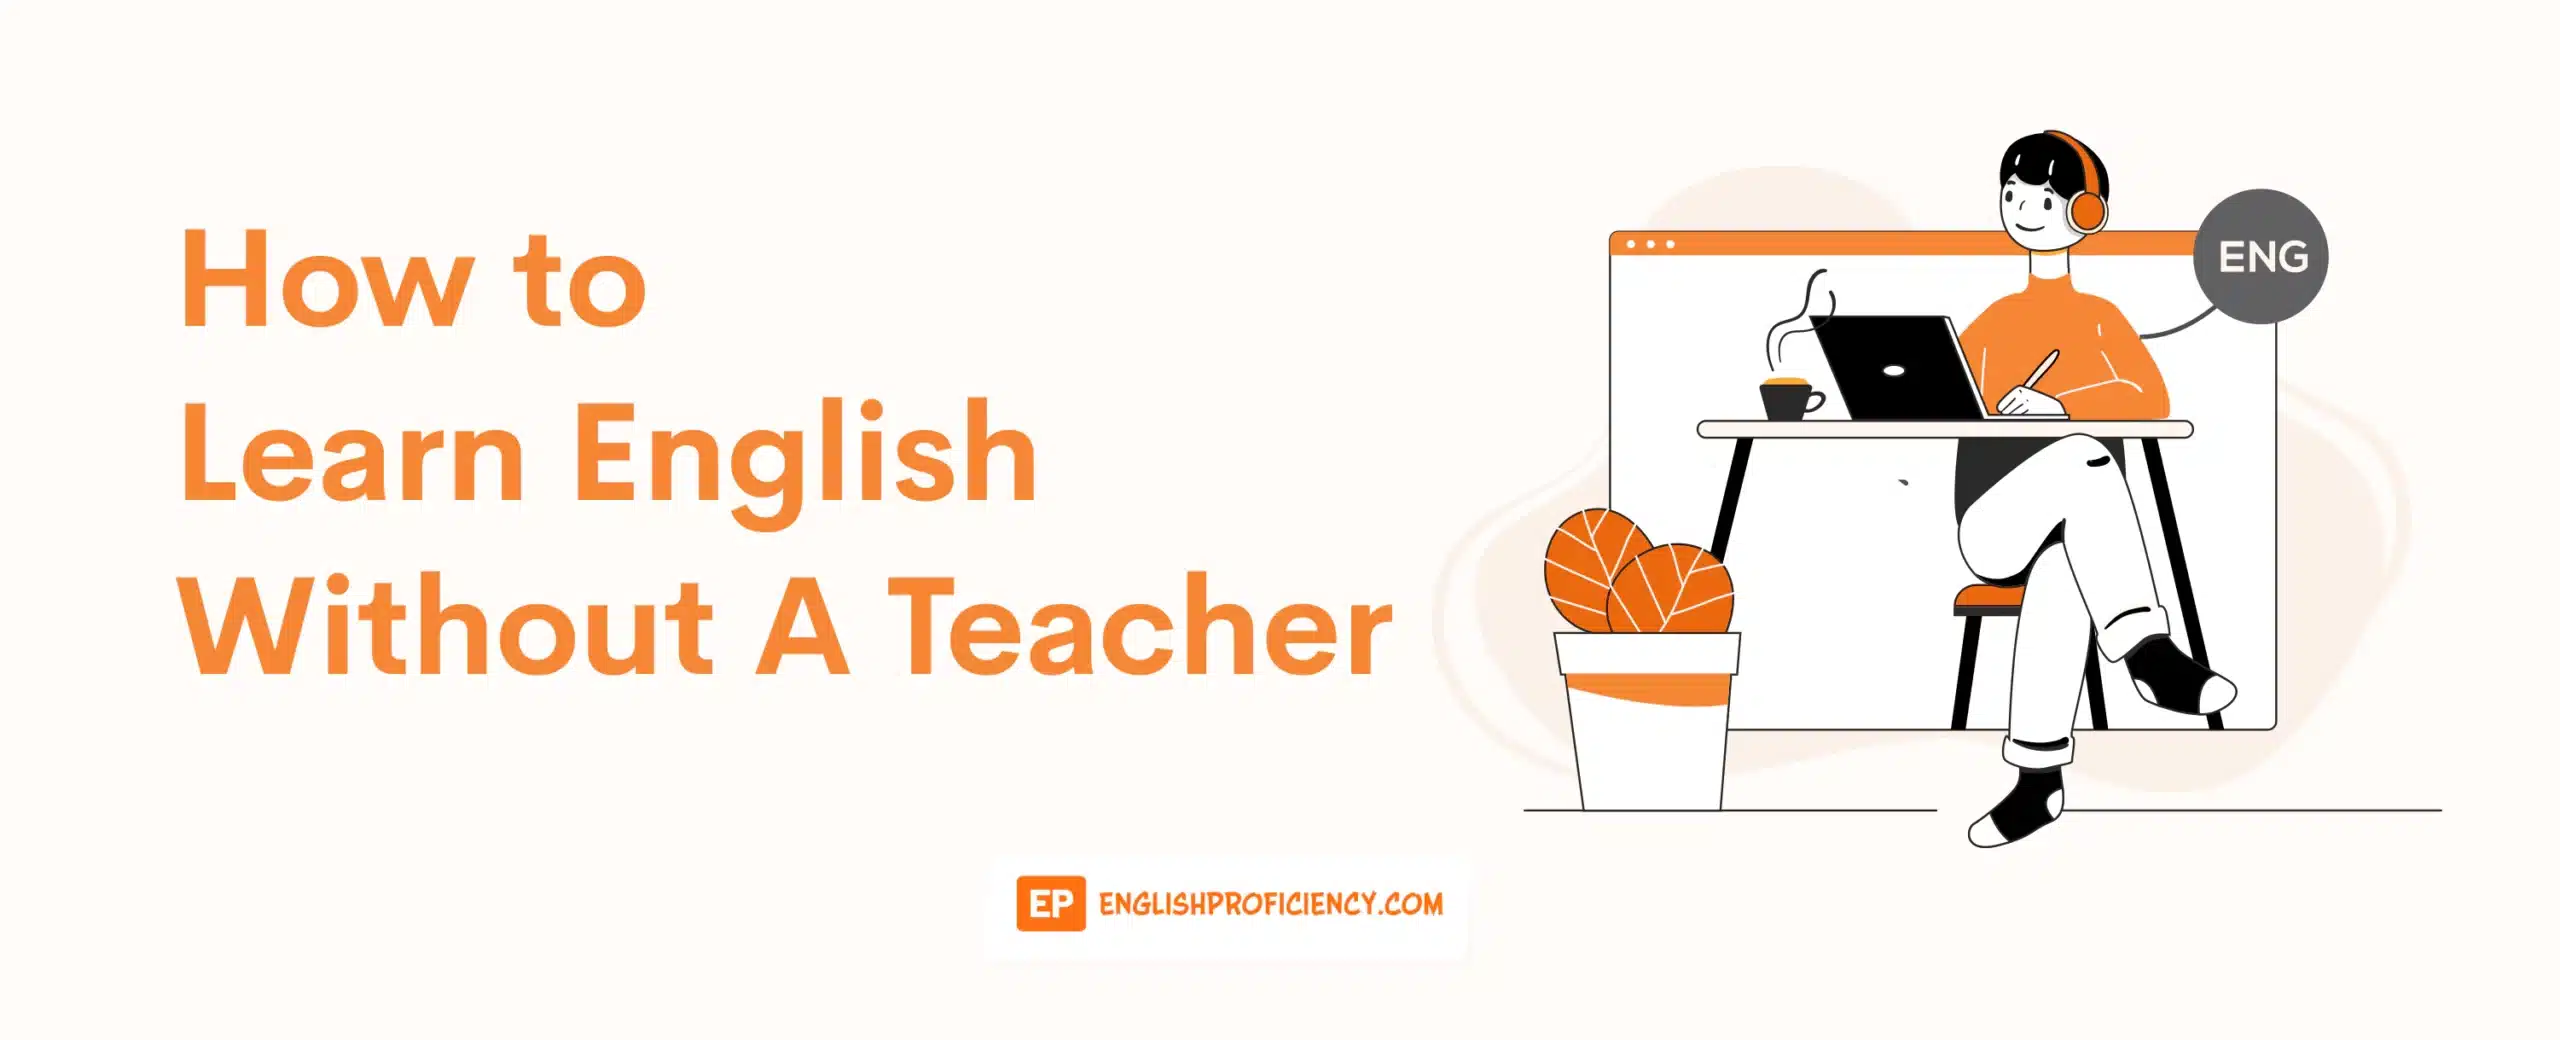 How to Learn English Without a Teacher